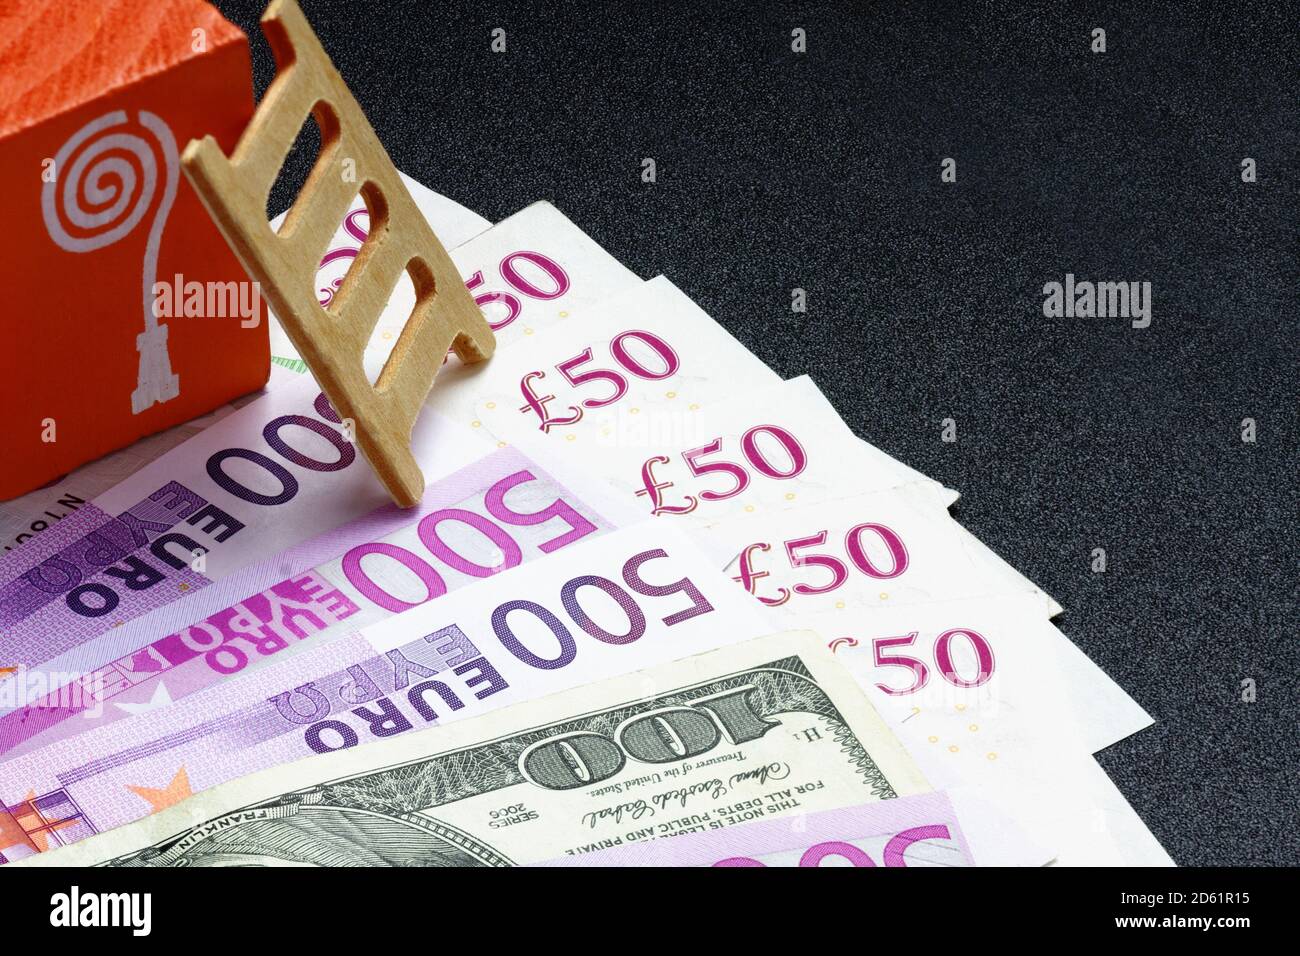 The picture shows money in large bills from English, European and American, on an orange background is a twisted hose for refueling or charging wire. Stock Photo